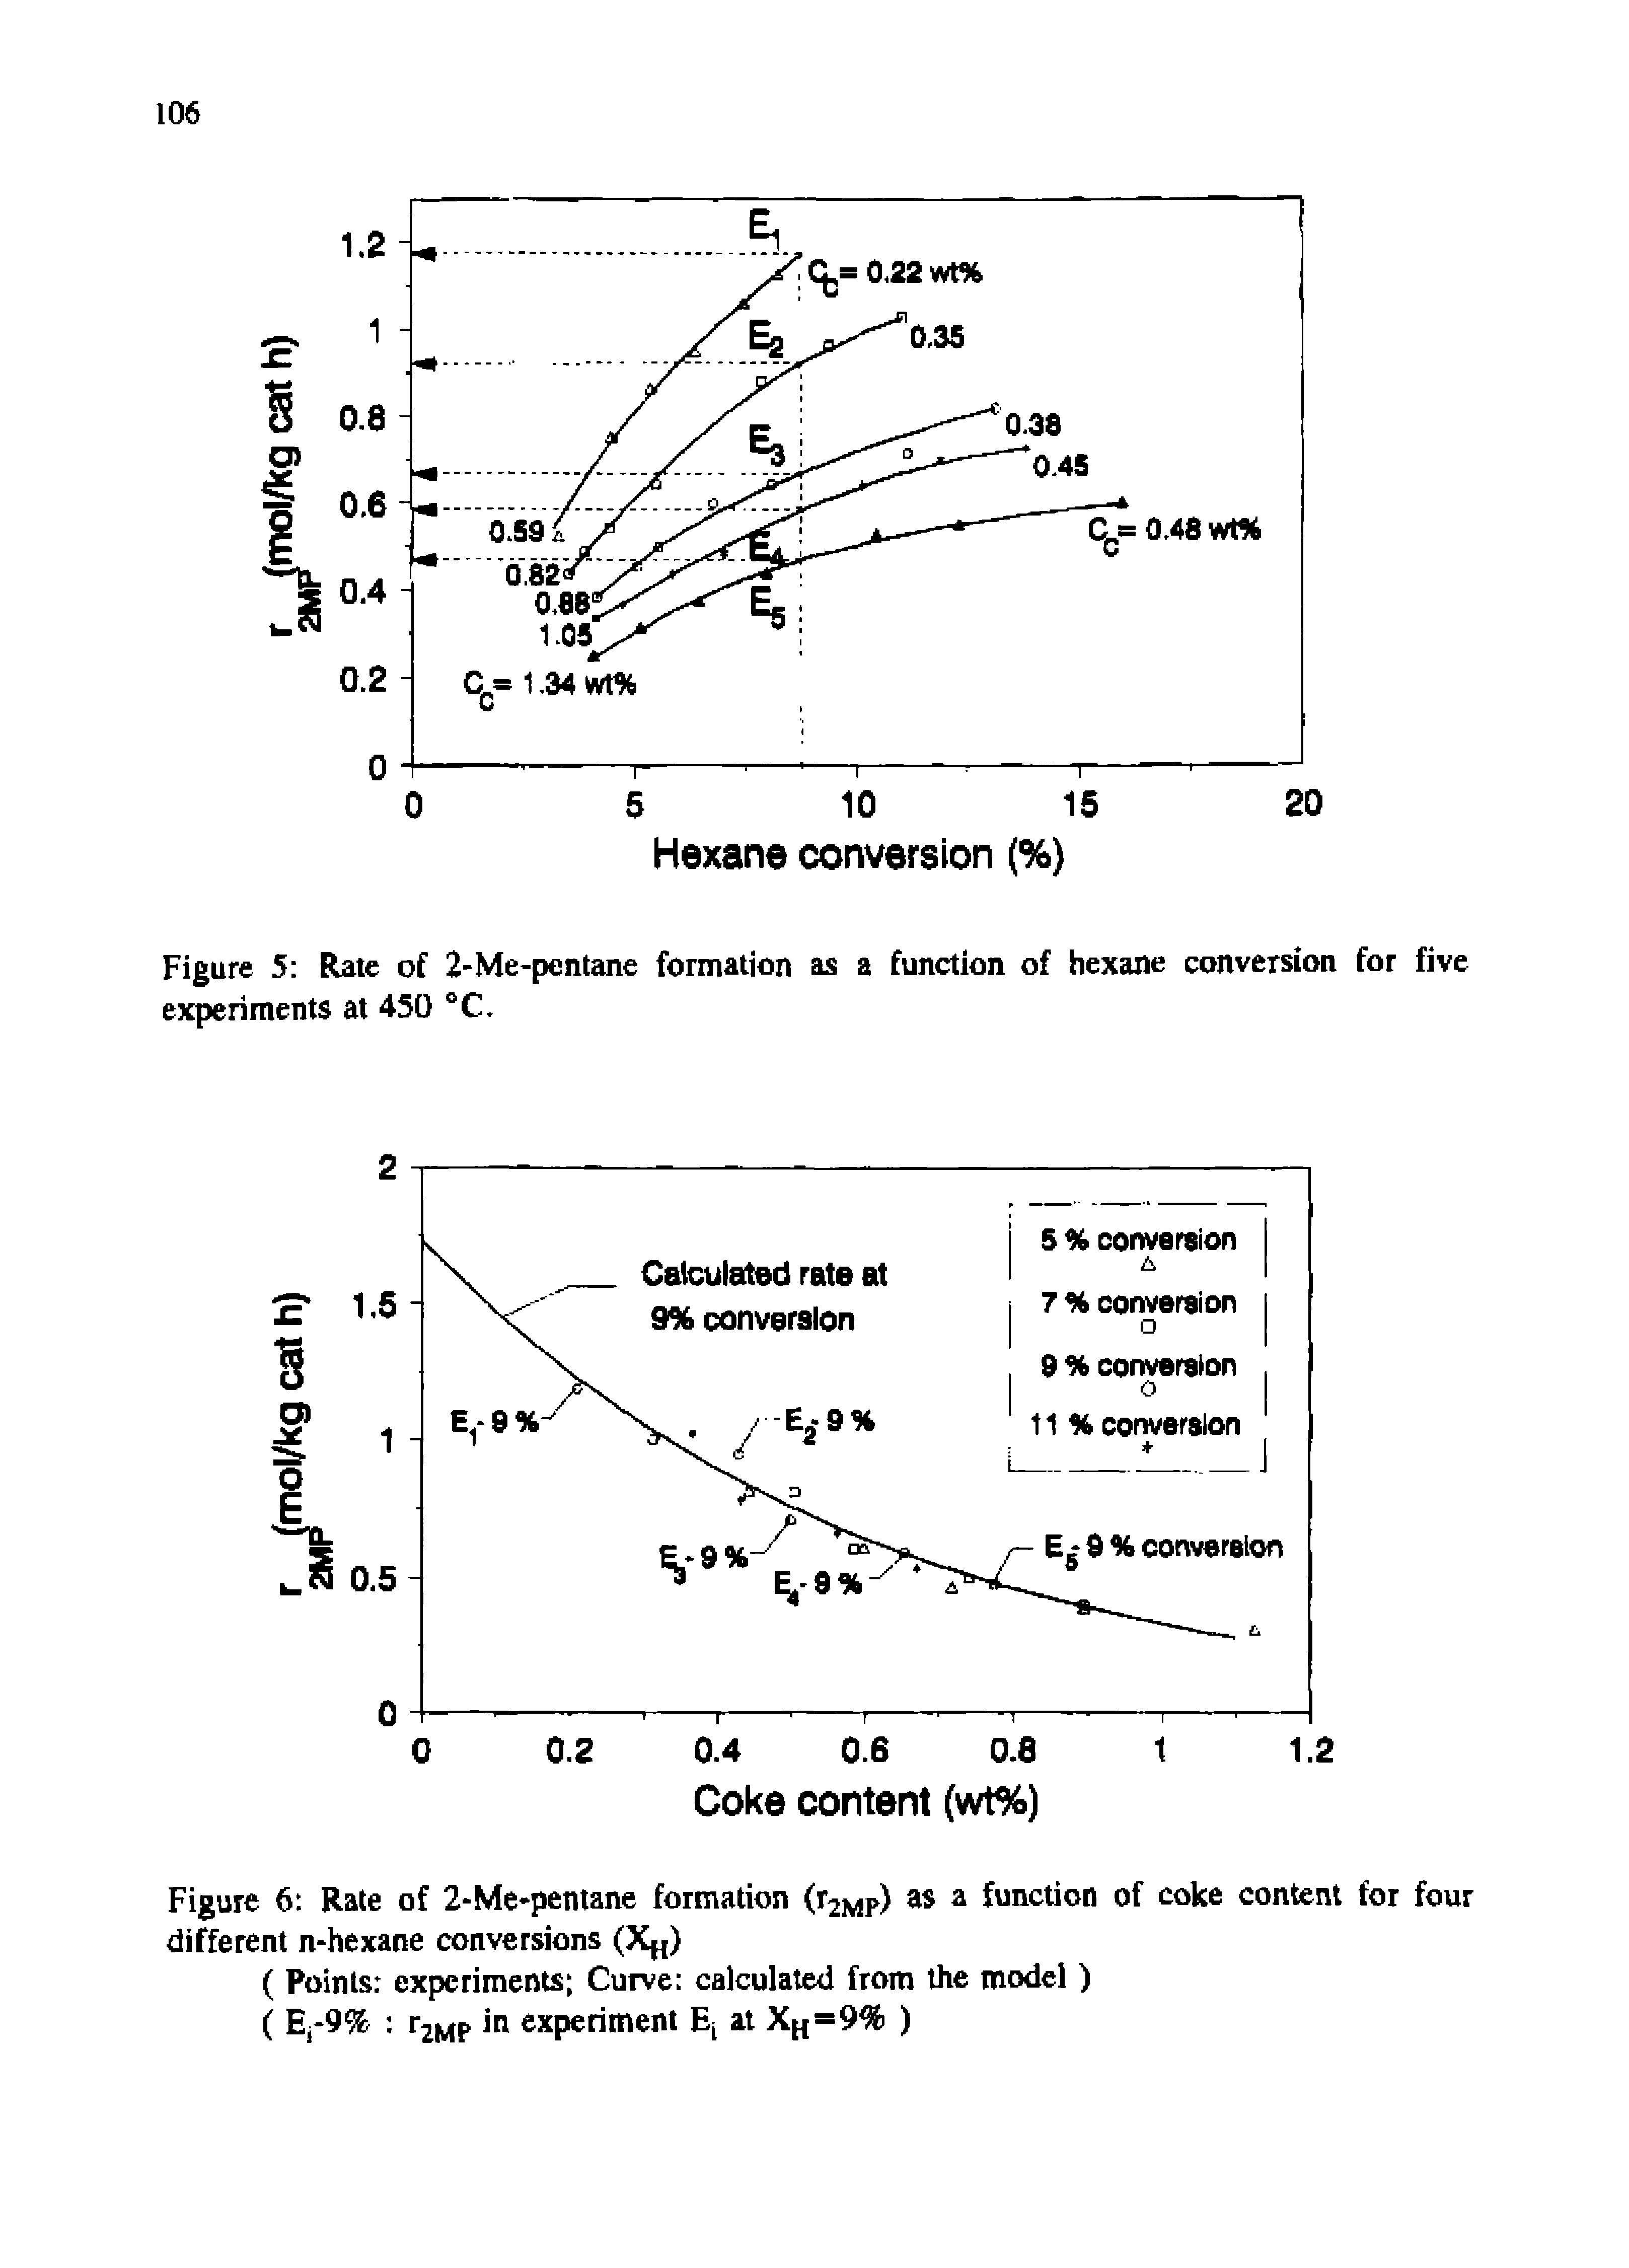 Figure 5 Rate of 2-Me-pentane formation as 2 function of hexane conversion for five experiments at 450 °C.